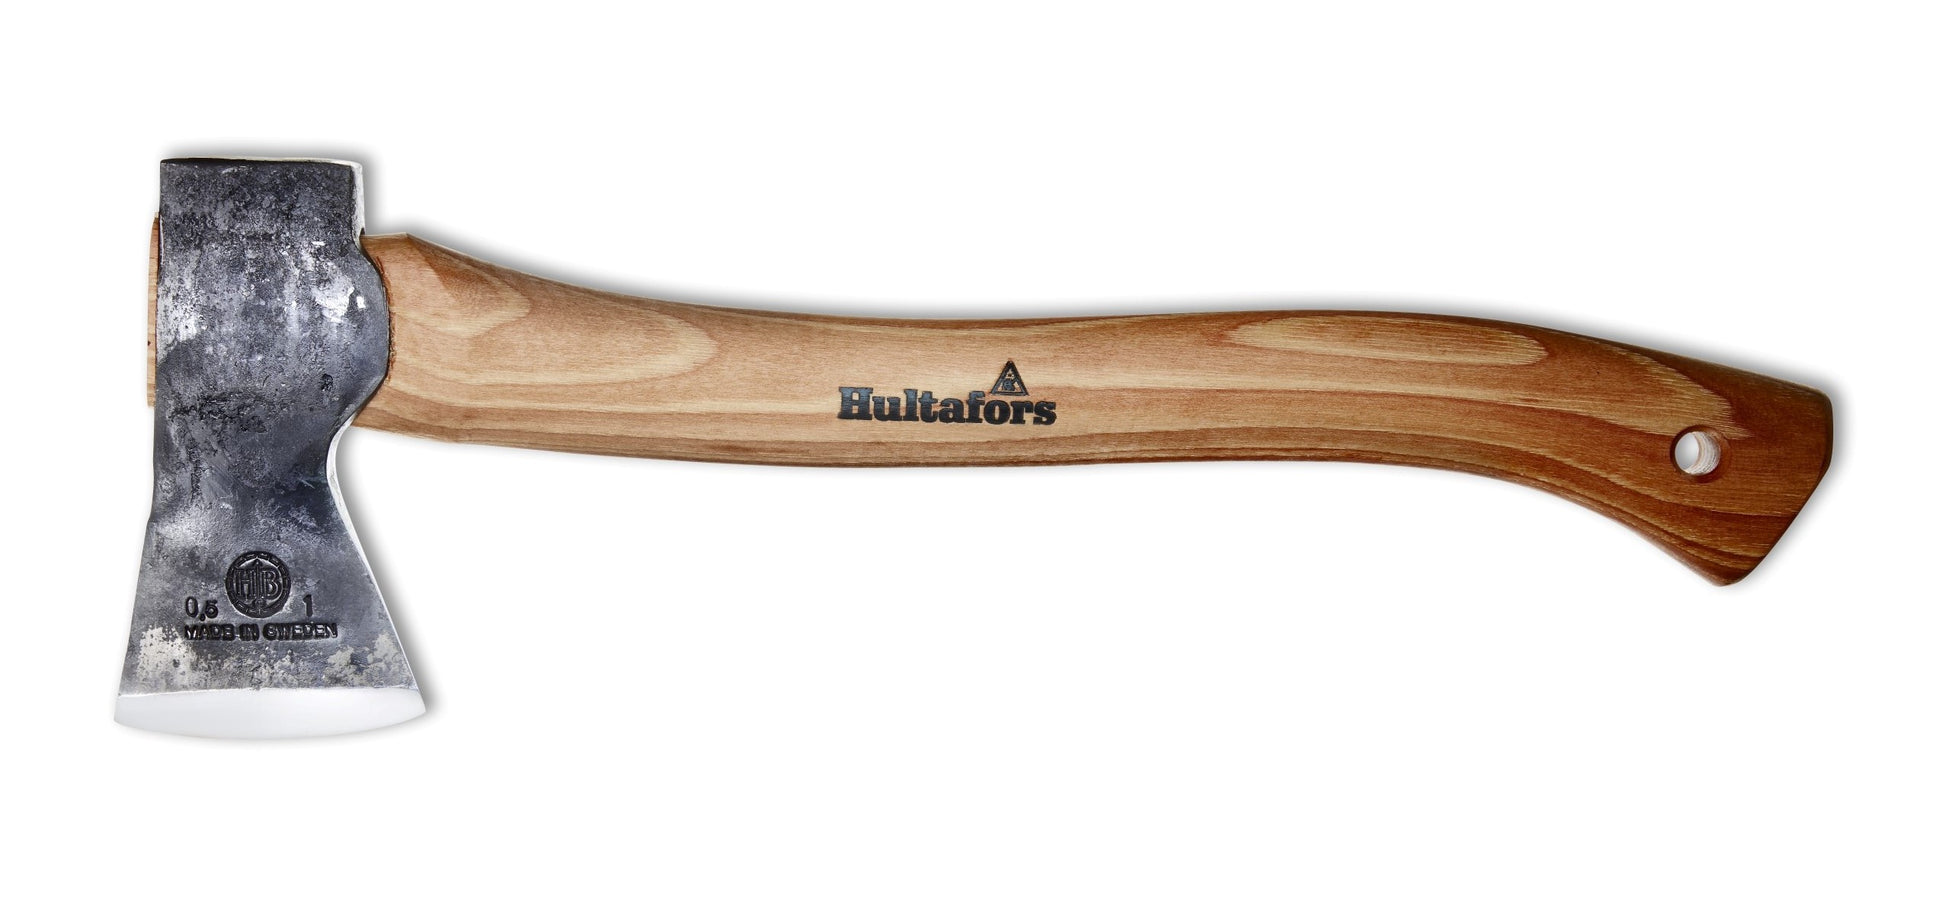 View of the Hultan trekking hatchet with full handle view